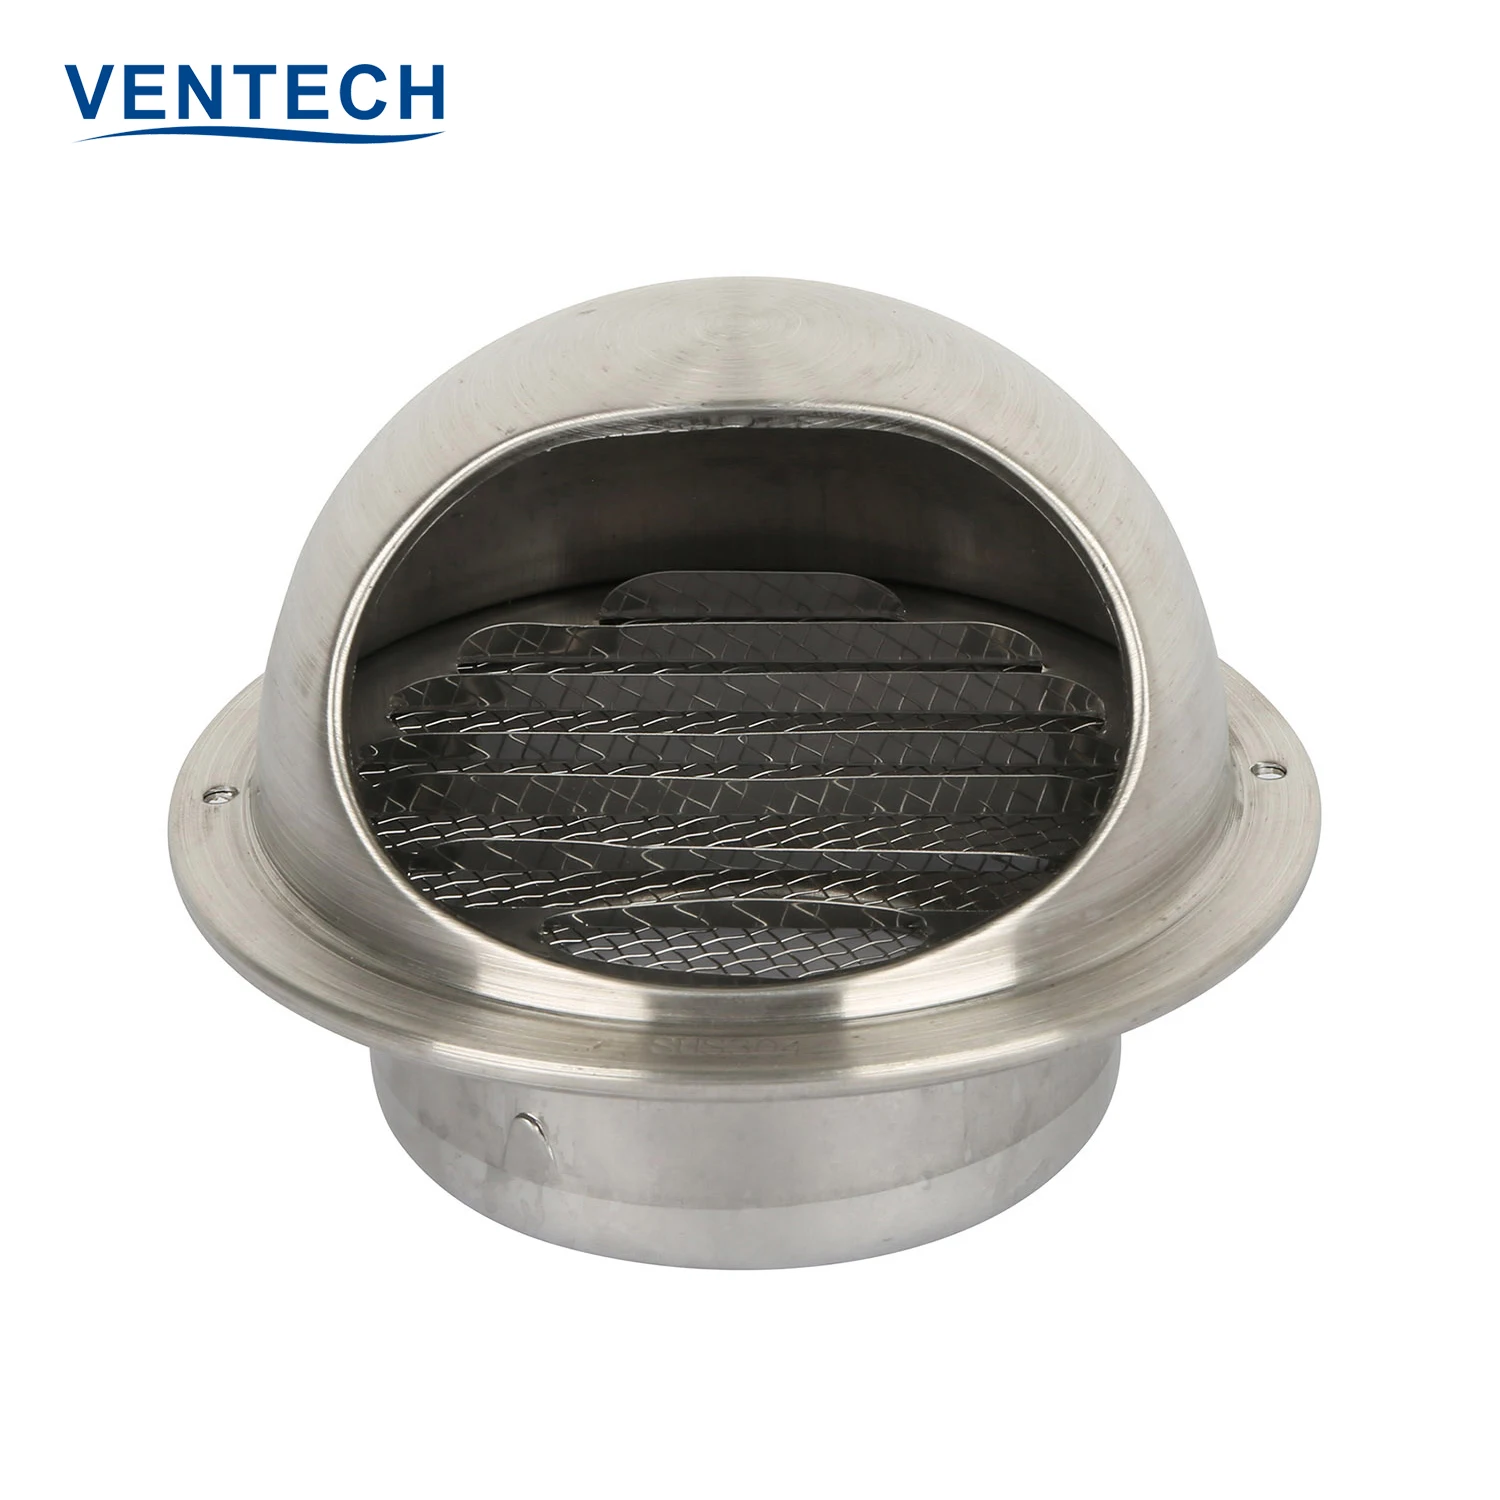 Hvac System Ball Directional Waterproof Exhaust Air Vent Cap For Ventilation